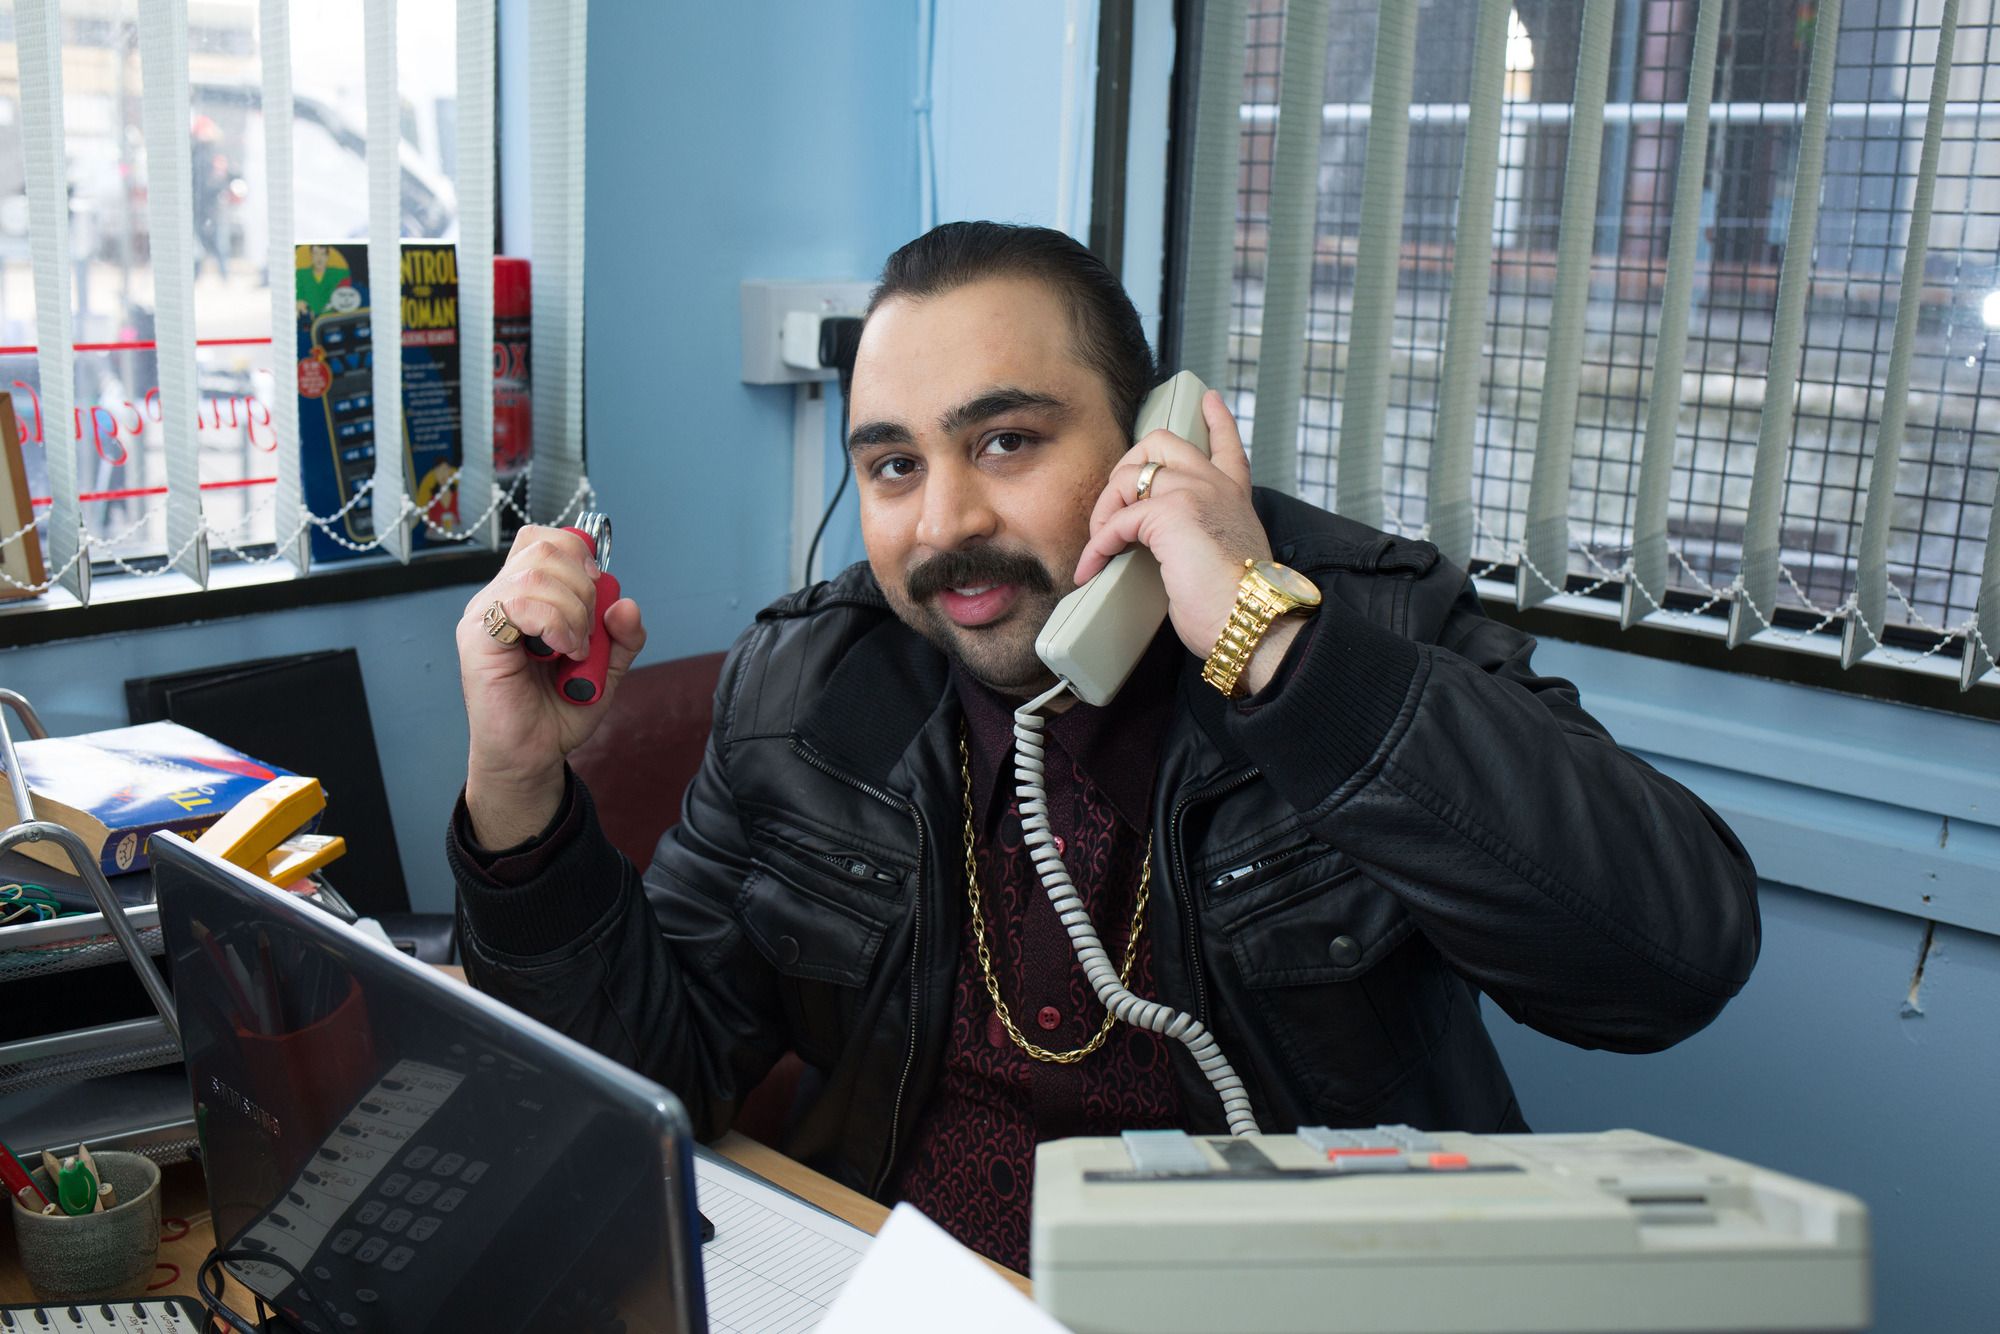 Chaudhry’s wheeler dealer Chabuddy G in ‘People Just Do Nothing’